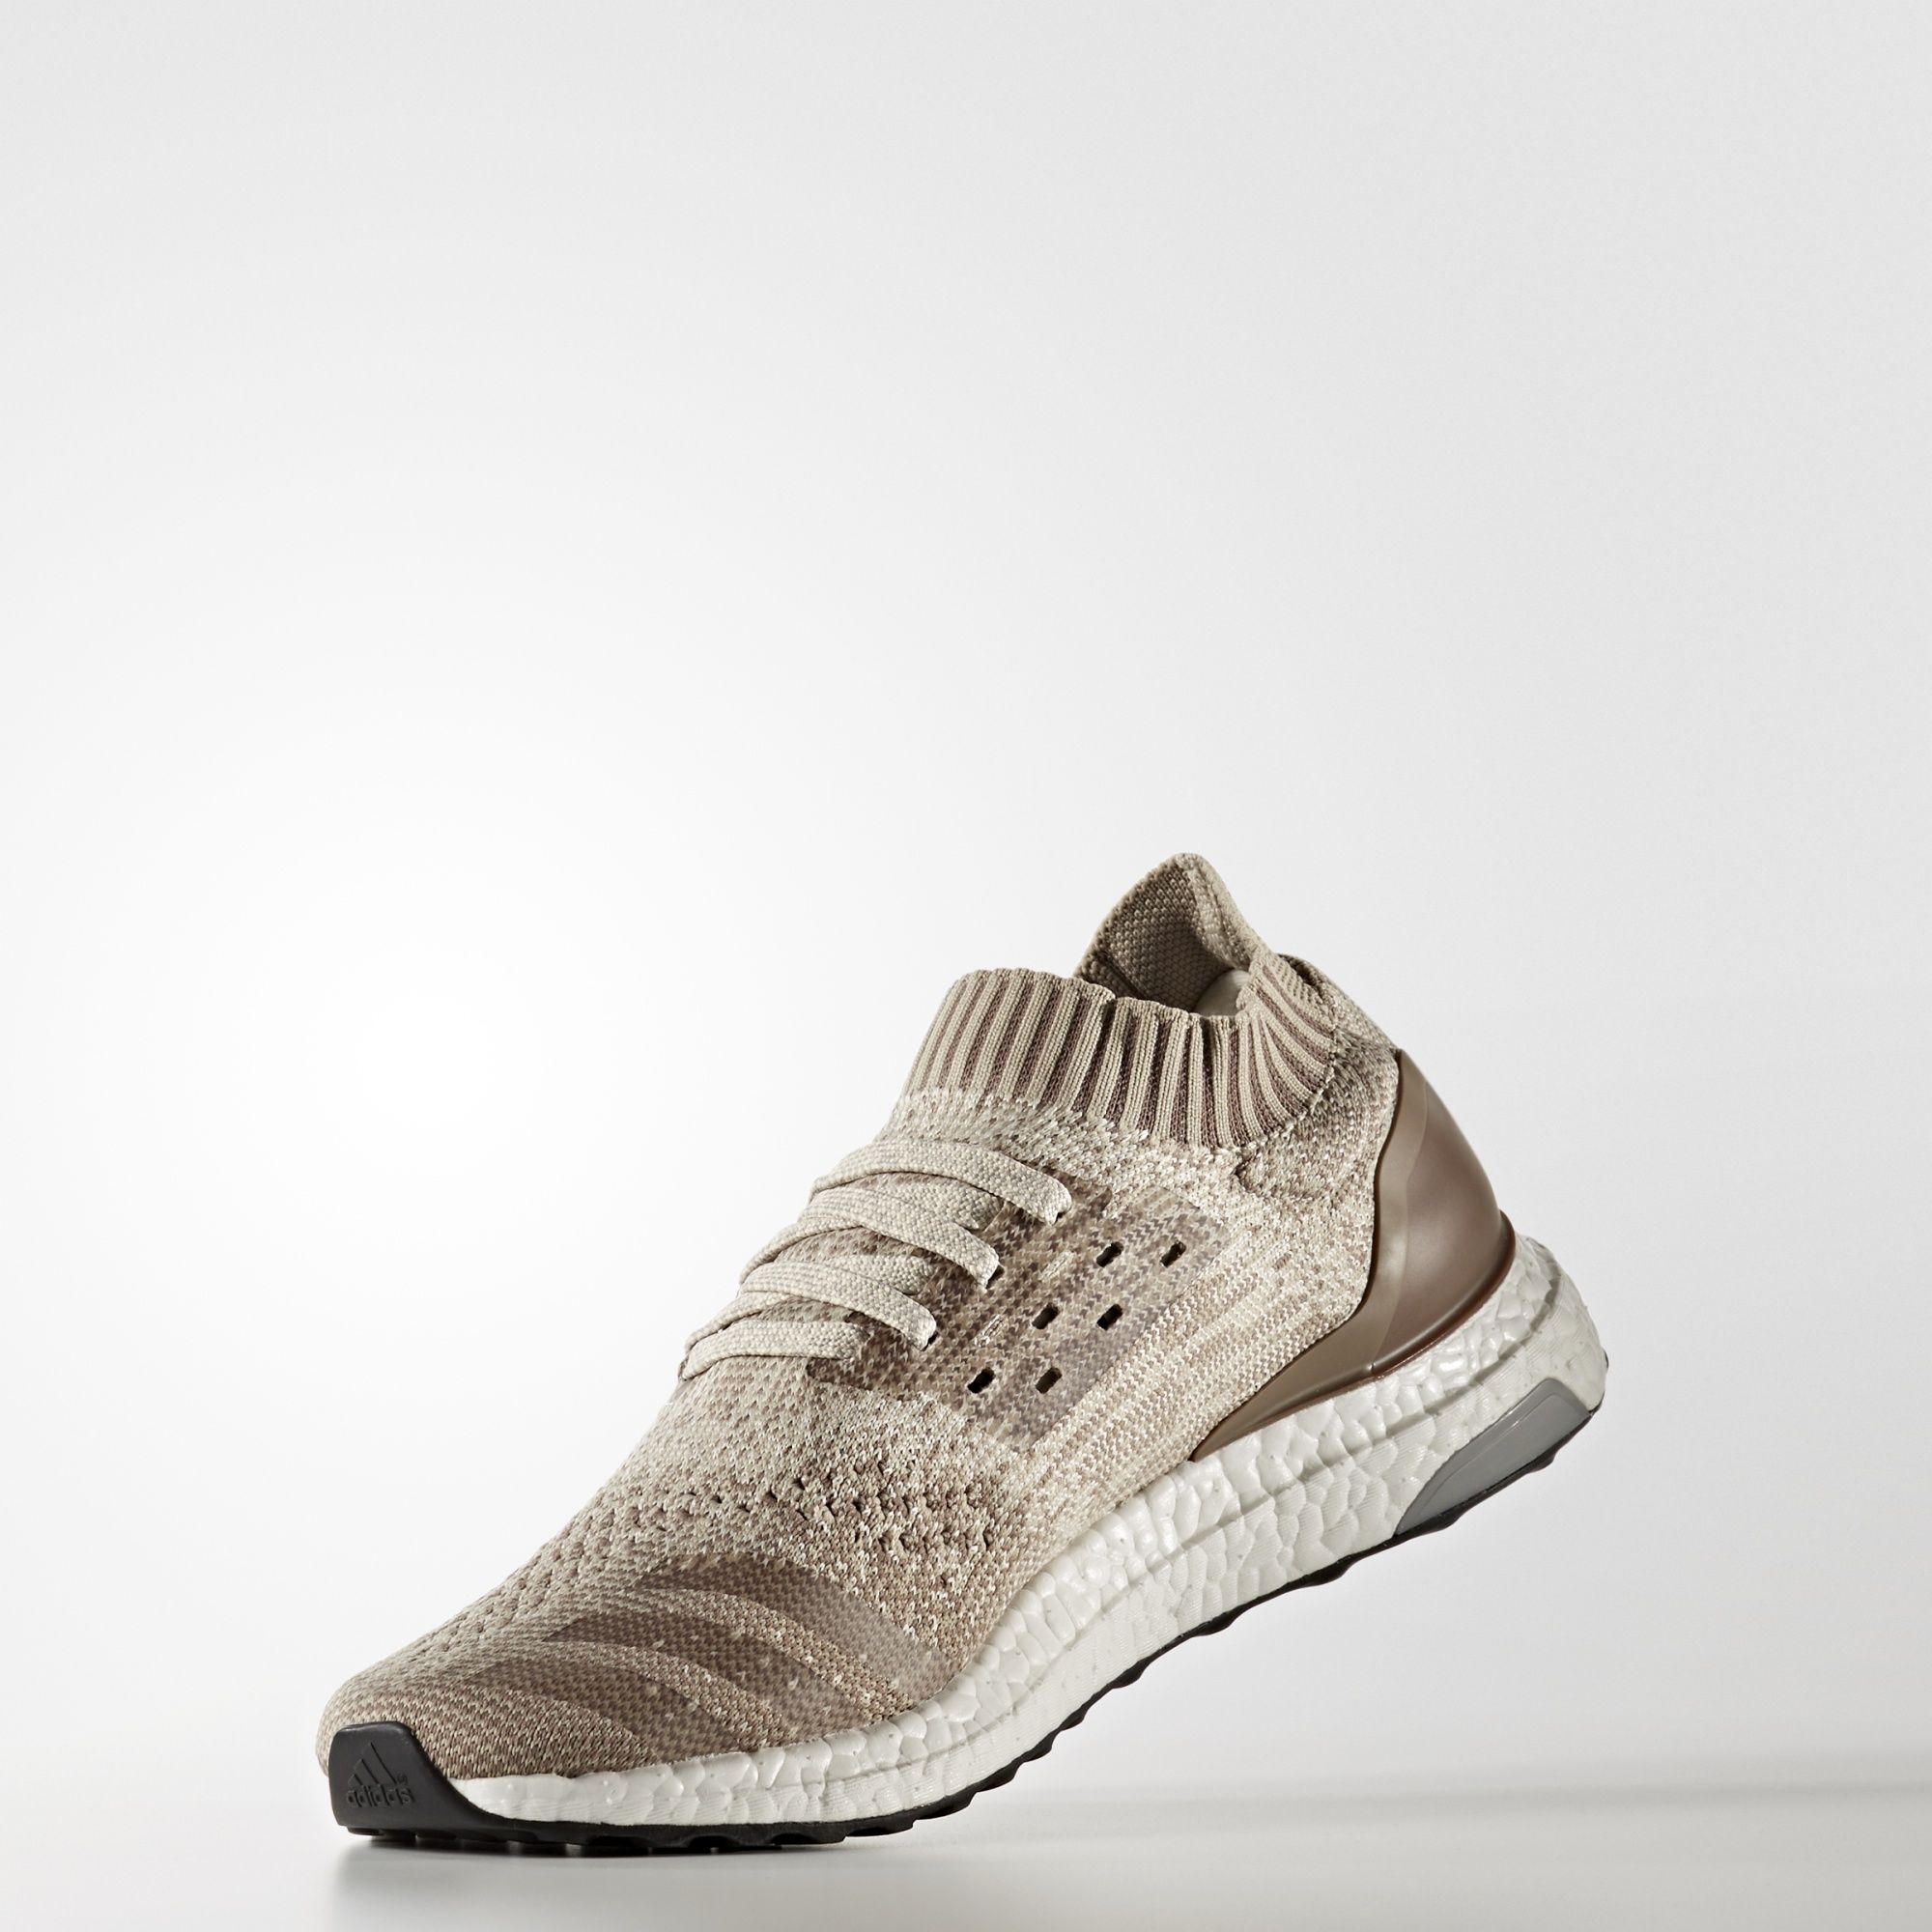 adidas-ultra-boost-uncaged-clear-brown-3